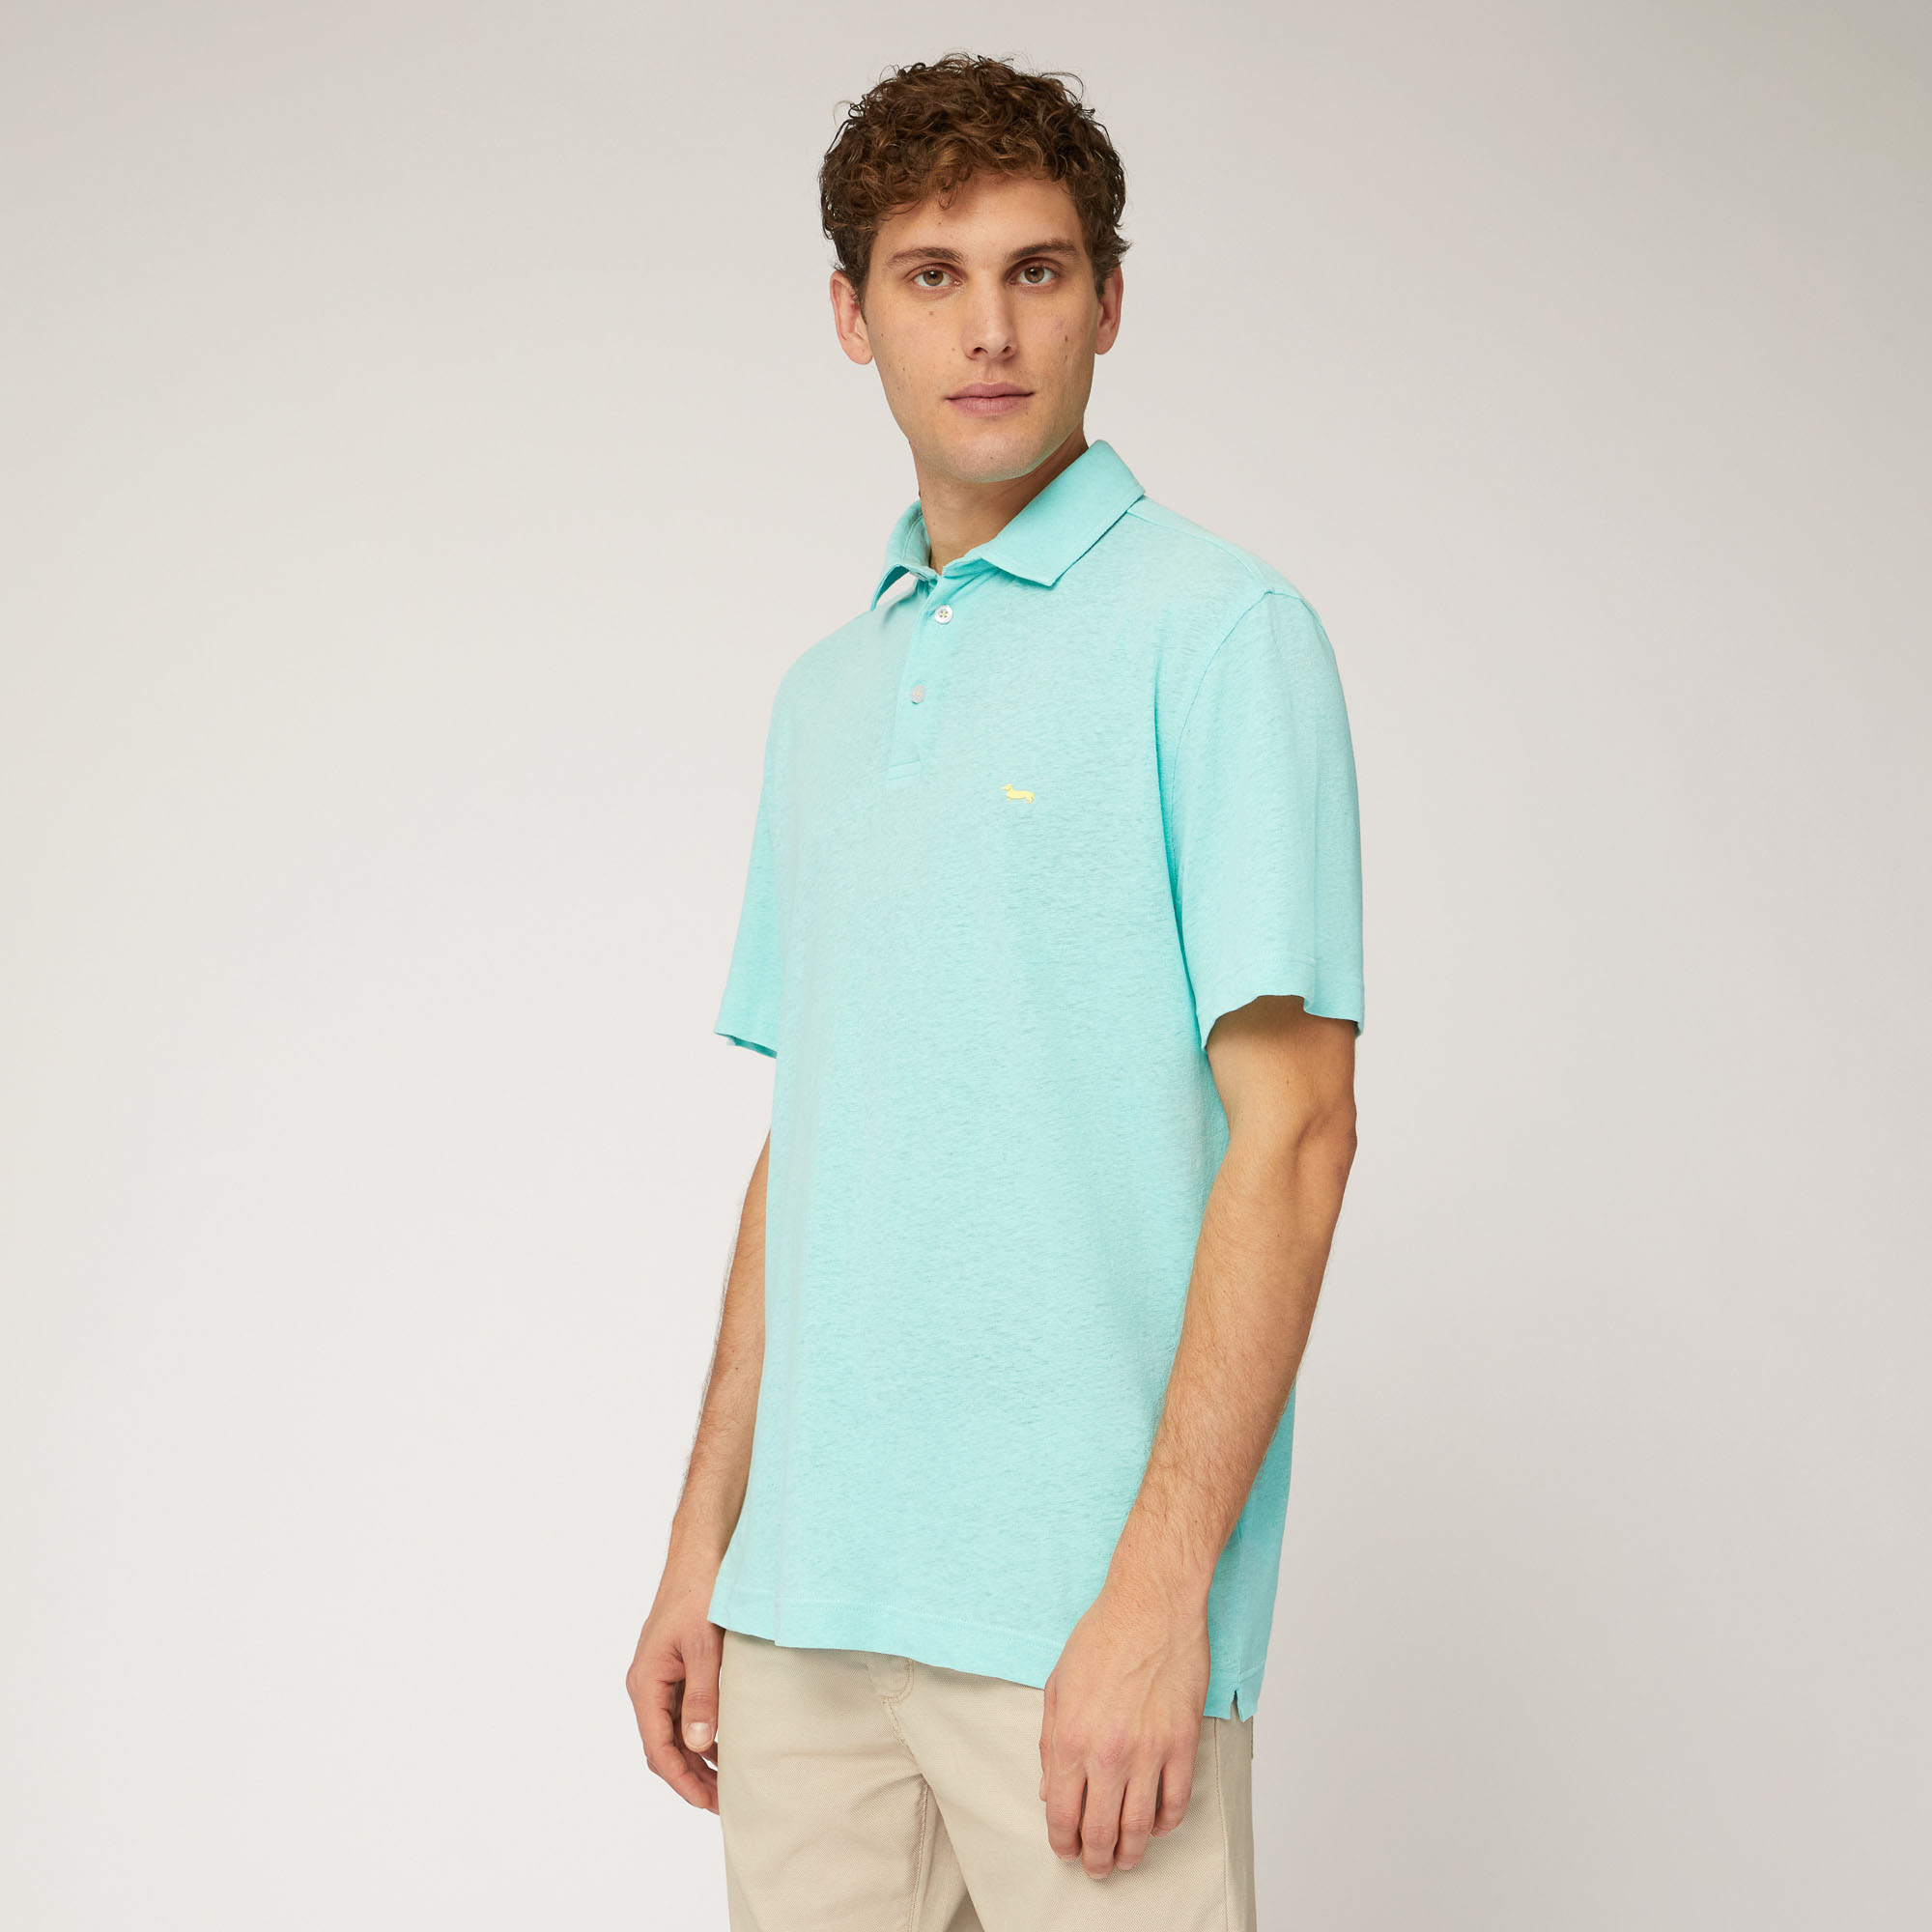 Cotton and Linen Jersey Polo, Light Blue, large